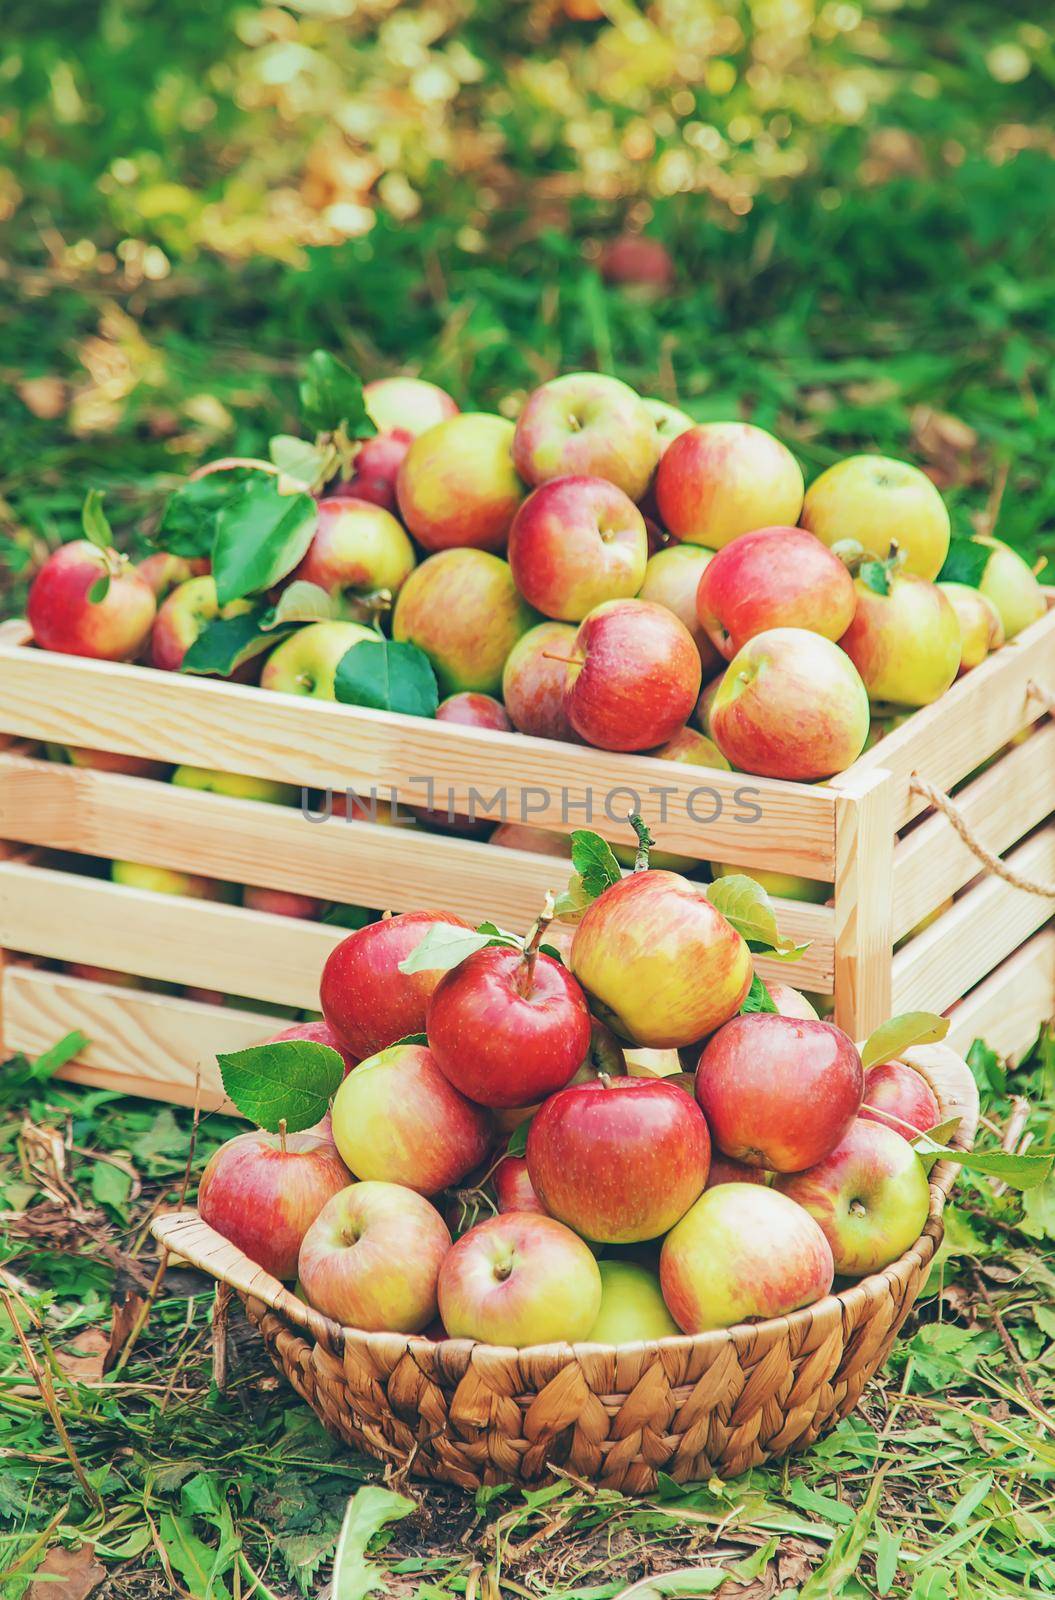 Harvest apples in a box on a tree in the garden. Selective focus. nature.